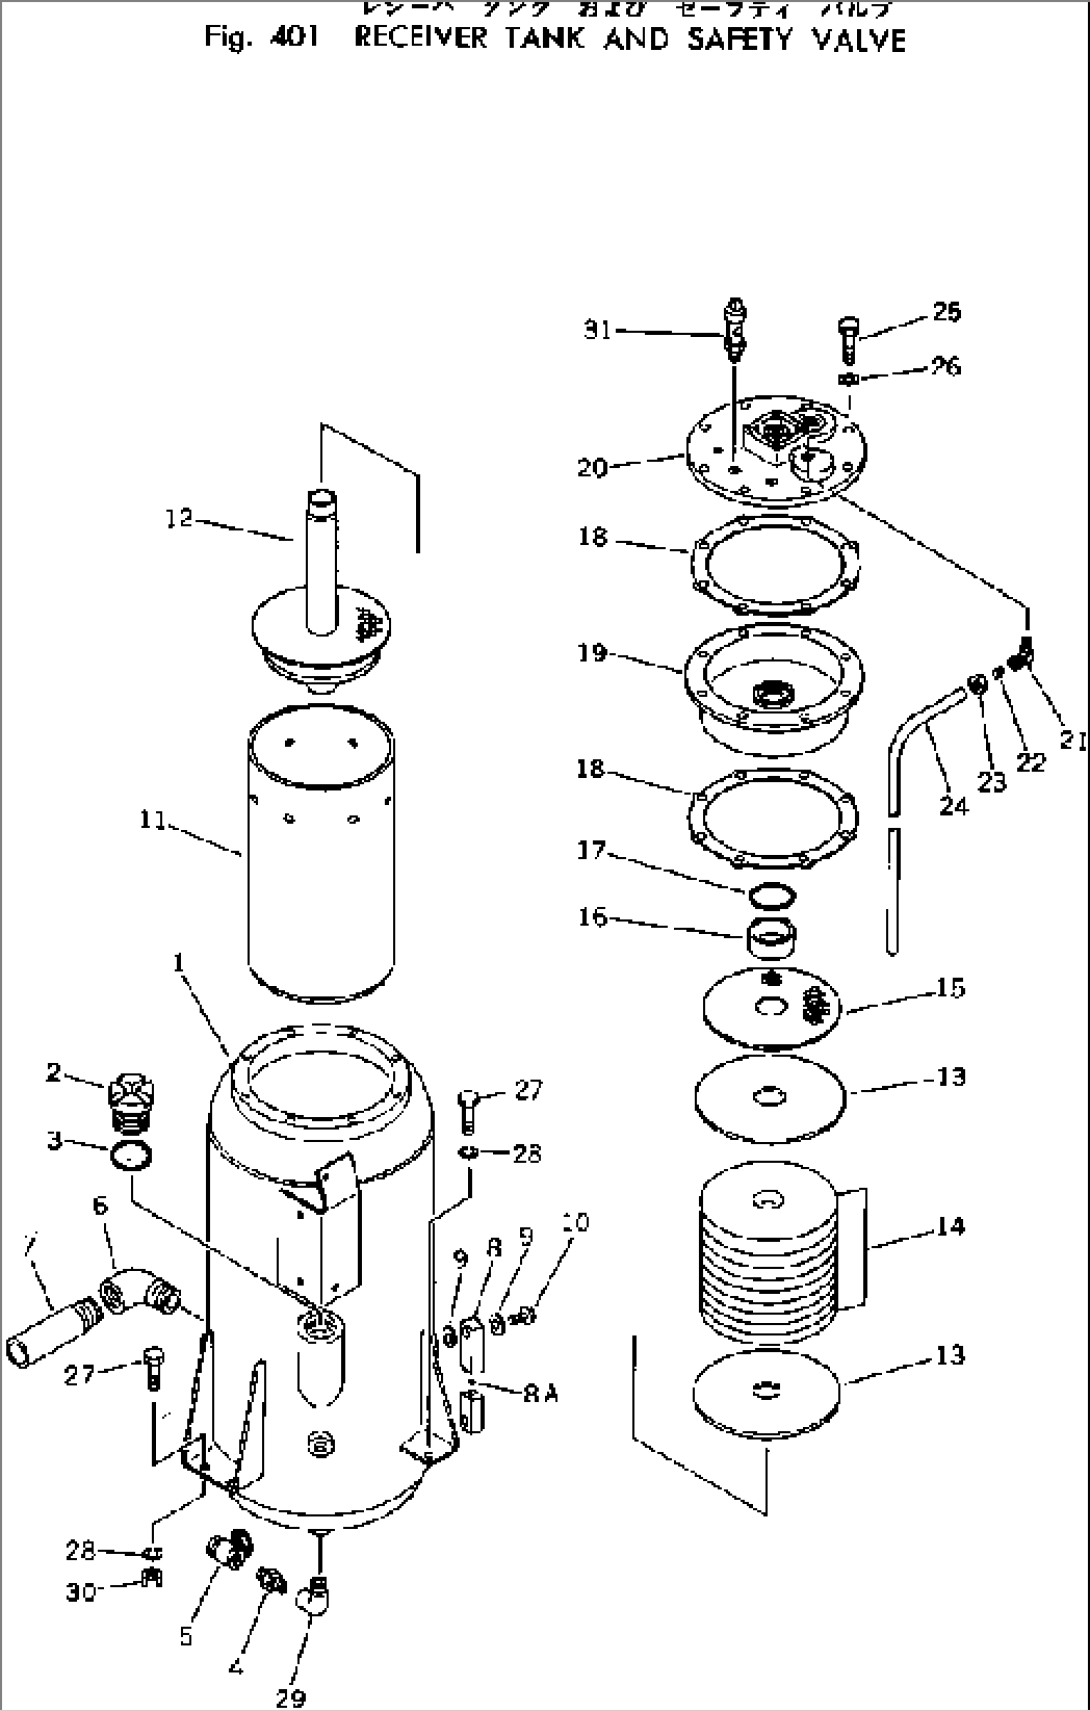 RECEIVER TANK AND SAFETY VALVE